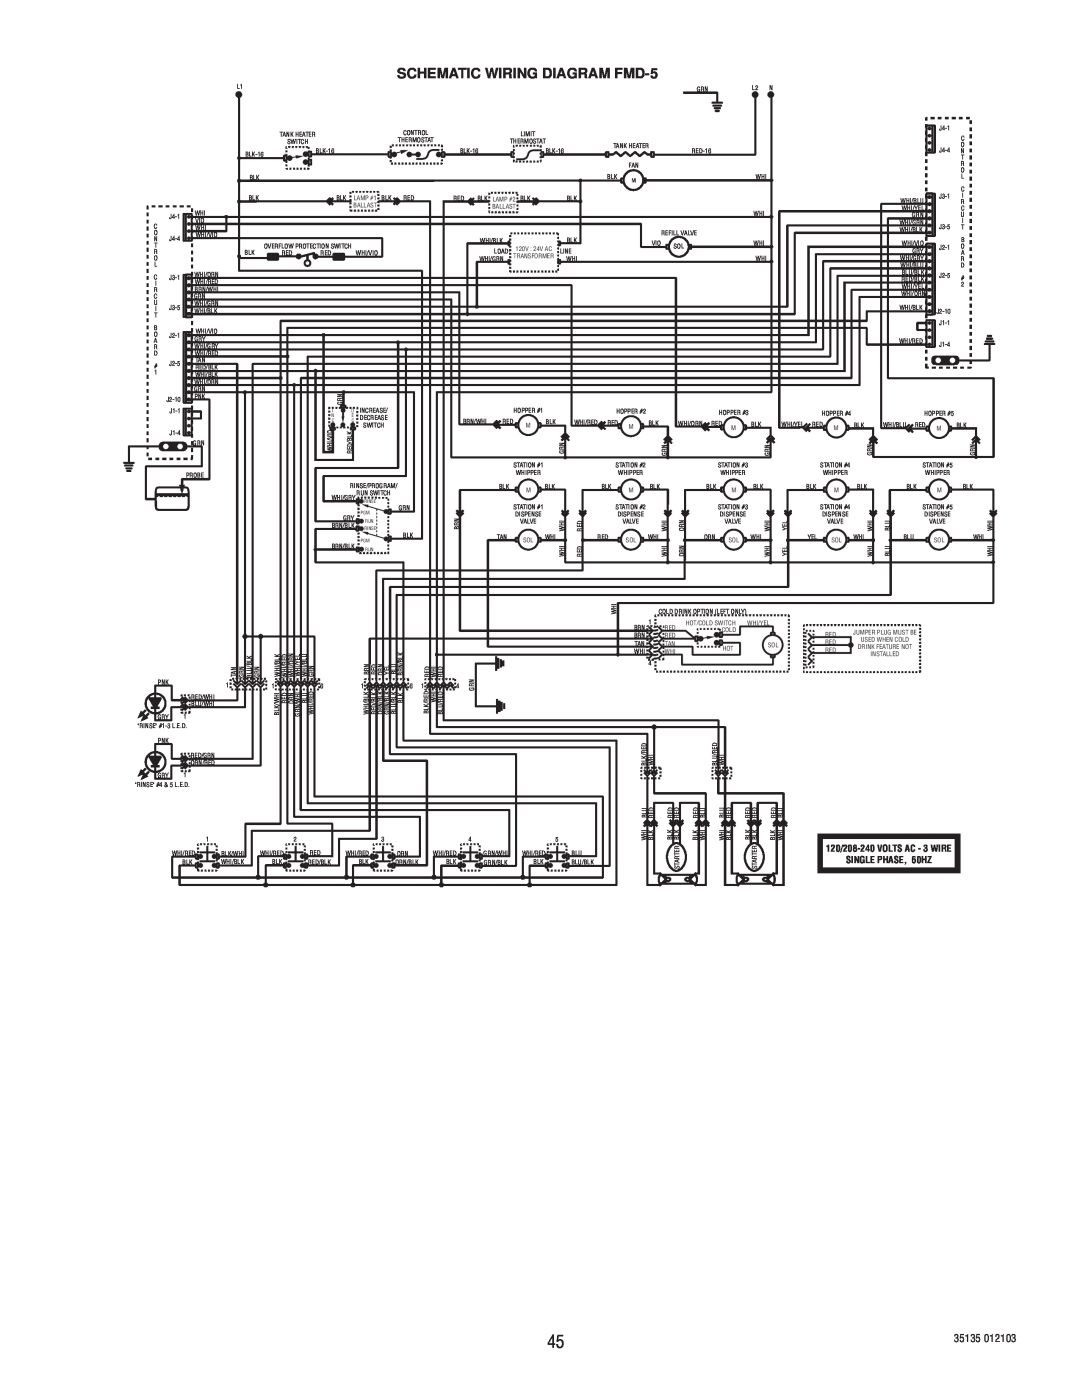 Bunn FMD-4 service manual SCHEMATIC WIRING DIAGRAM FMD-5, 120/208-240VOLTS AC - 3 WIRE, SINGLE PHASE, 60HZ 